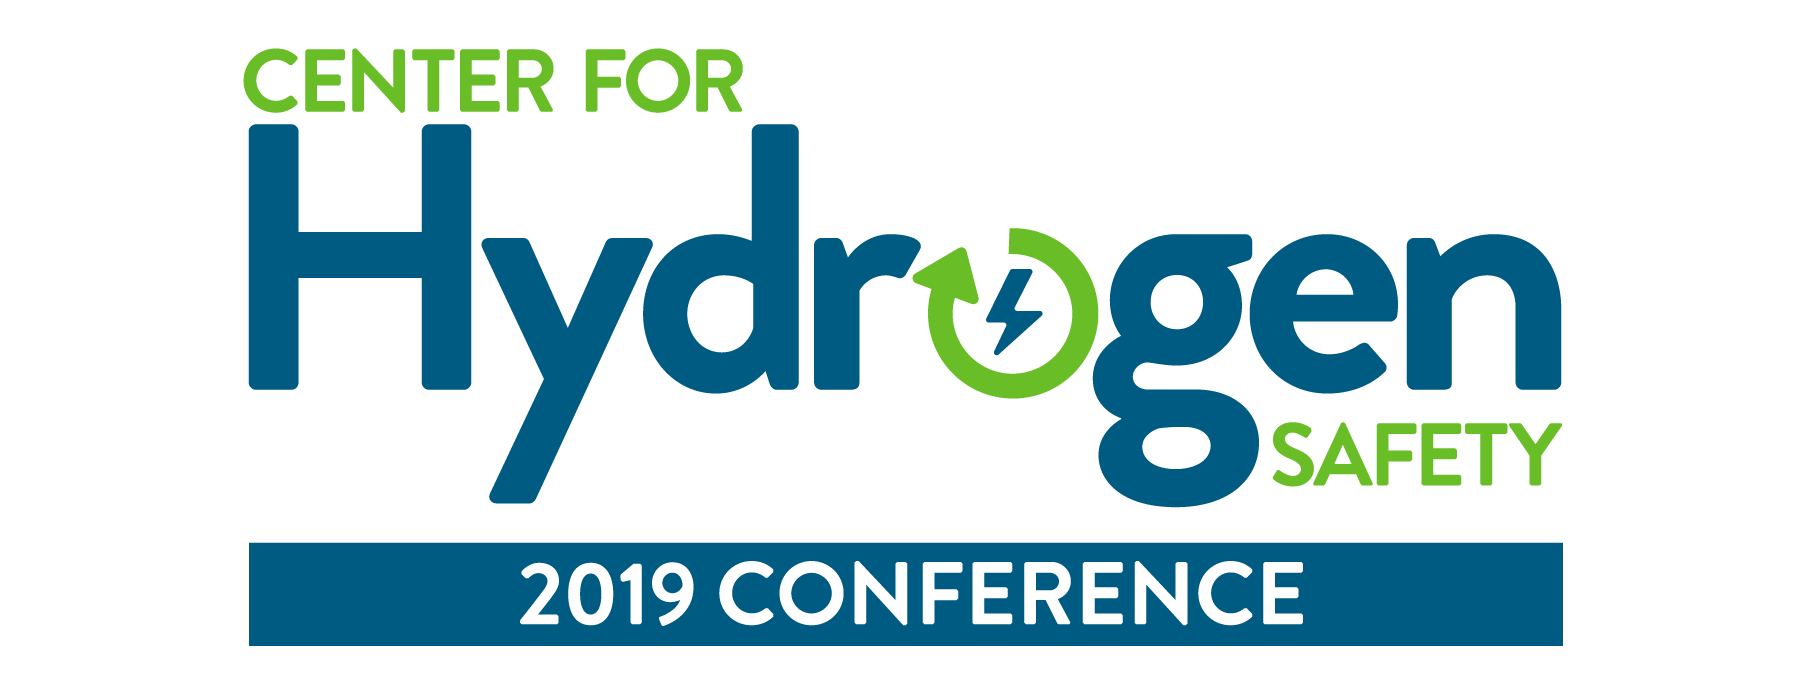 Center for Hydrogen Safety Conference